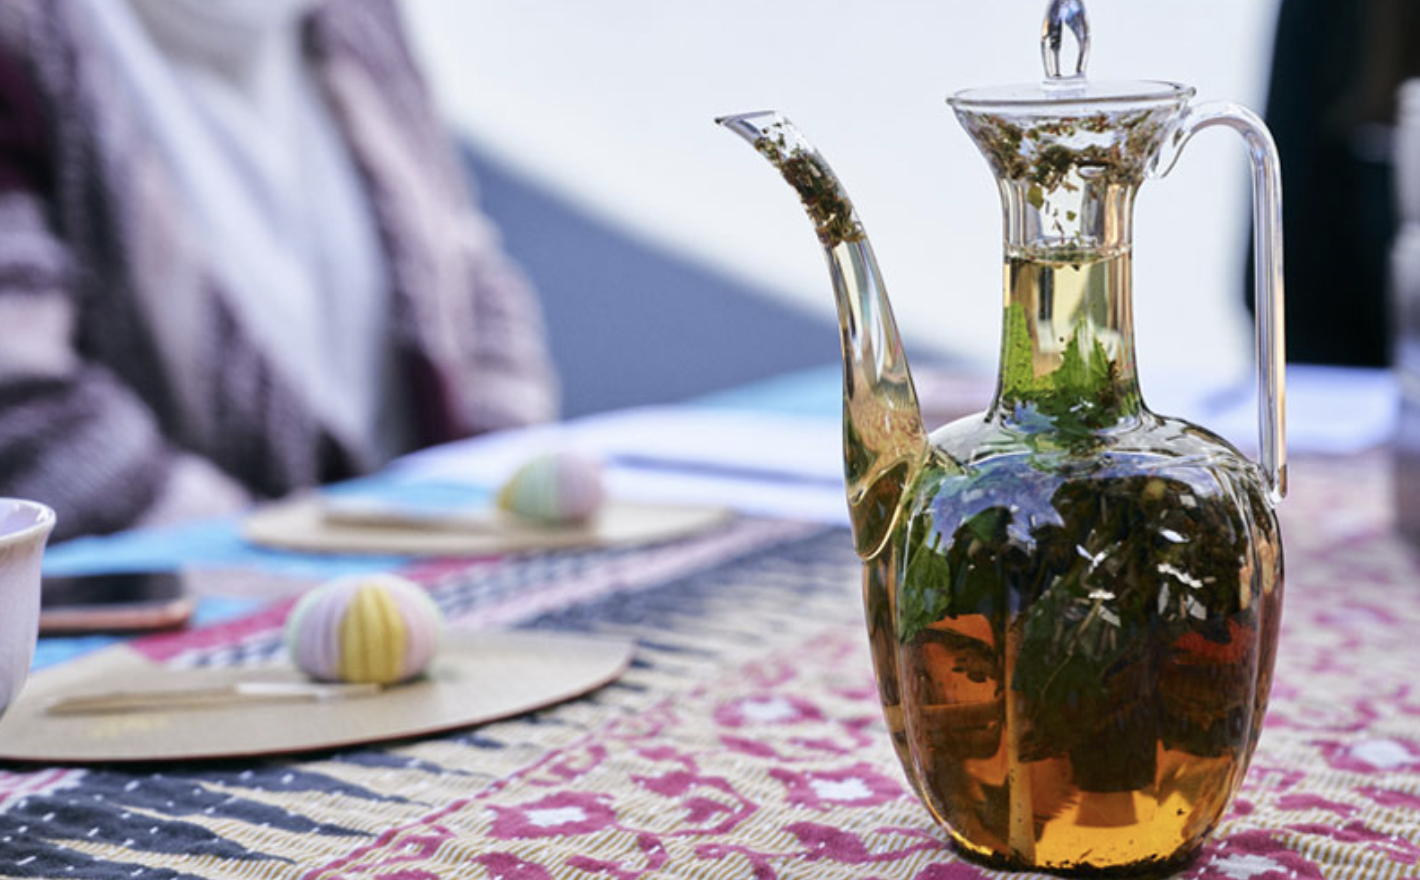 Featuring a collection of unique tea and Asian delicacies, this unique event has become extremely popular throughout the years it has been offered.